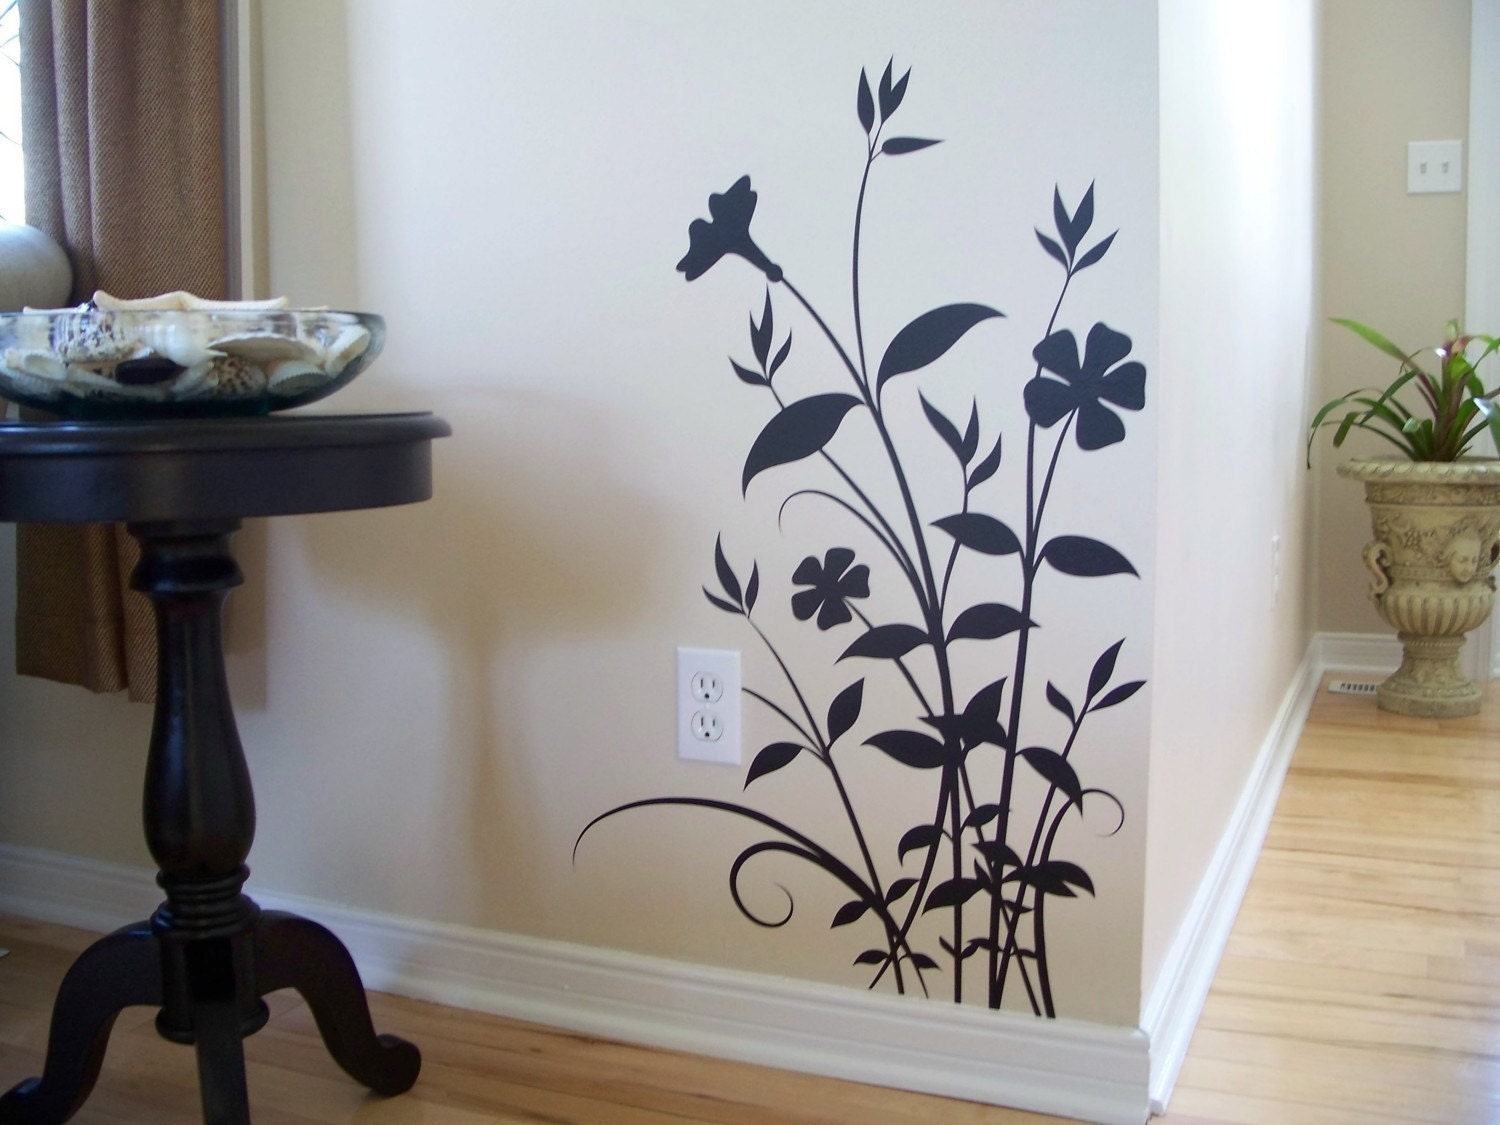 Nature's Bouquet - Vinyl Text Wall Words Decals Stickers Art Graphics